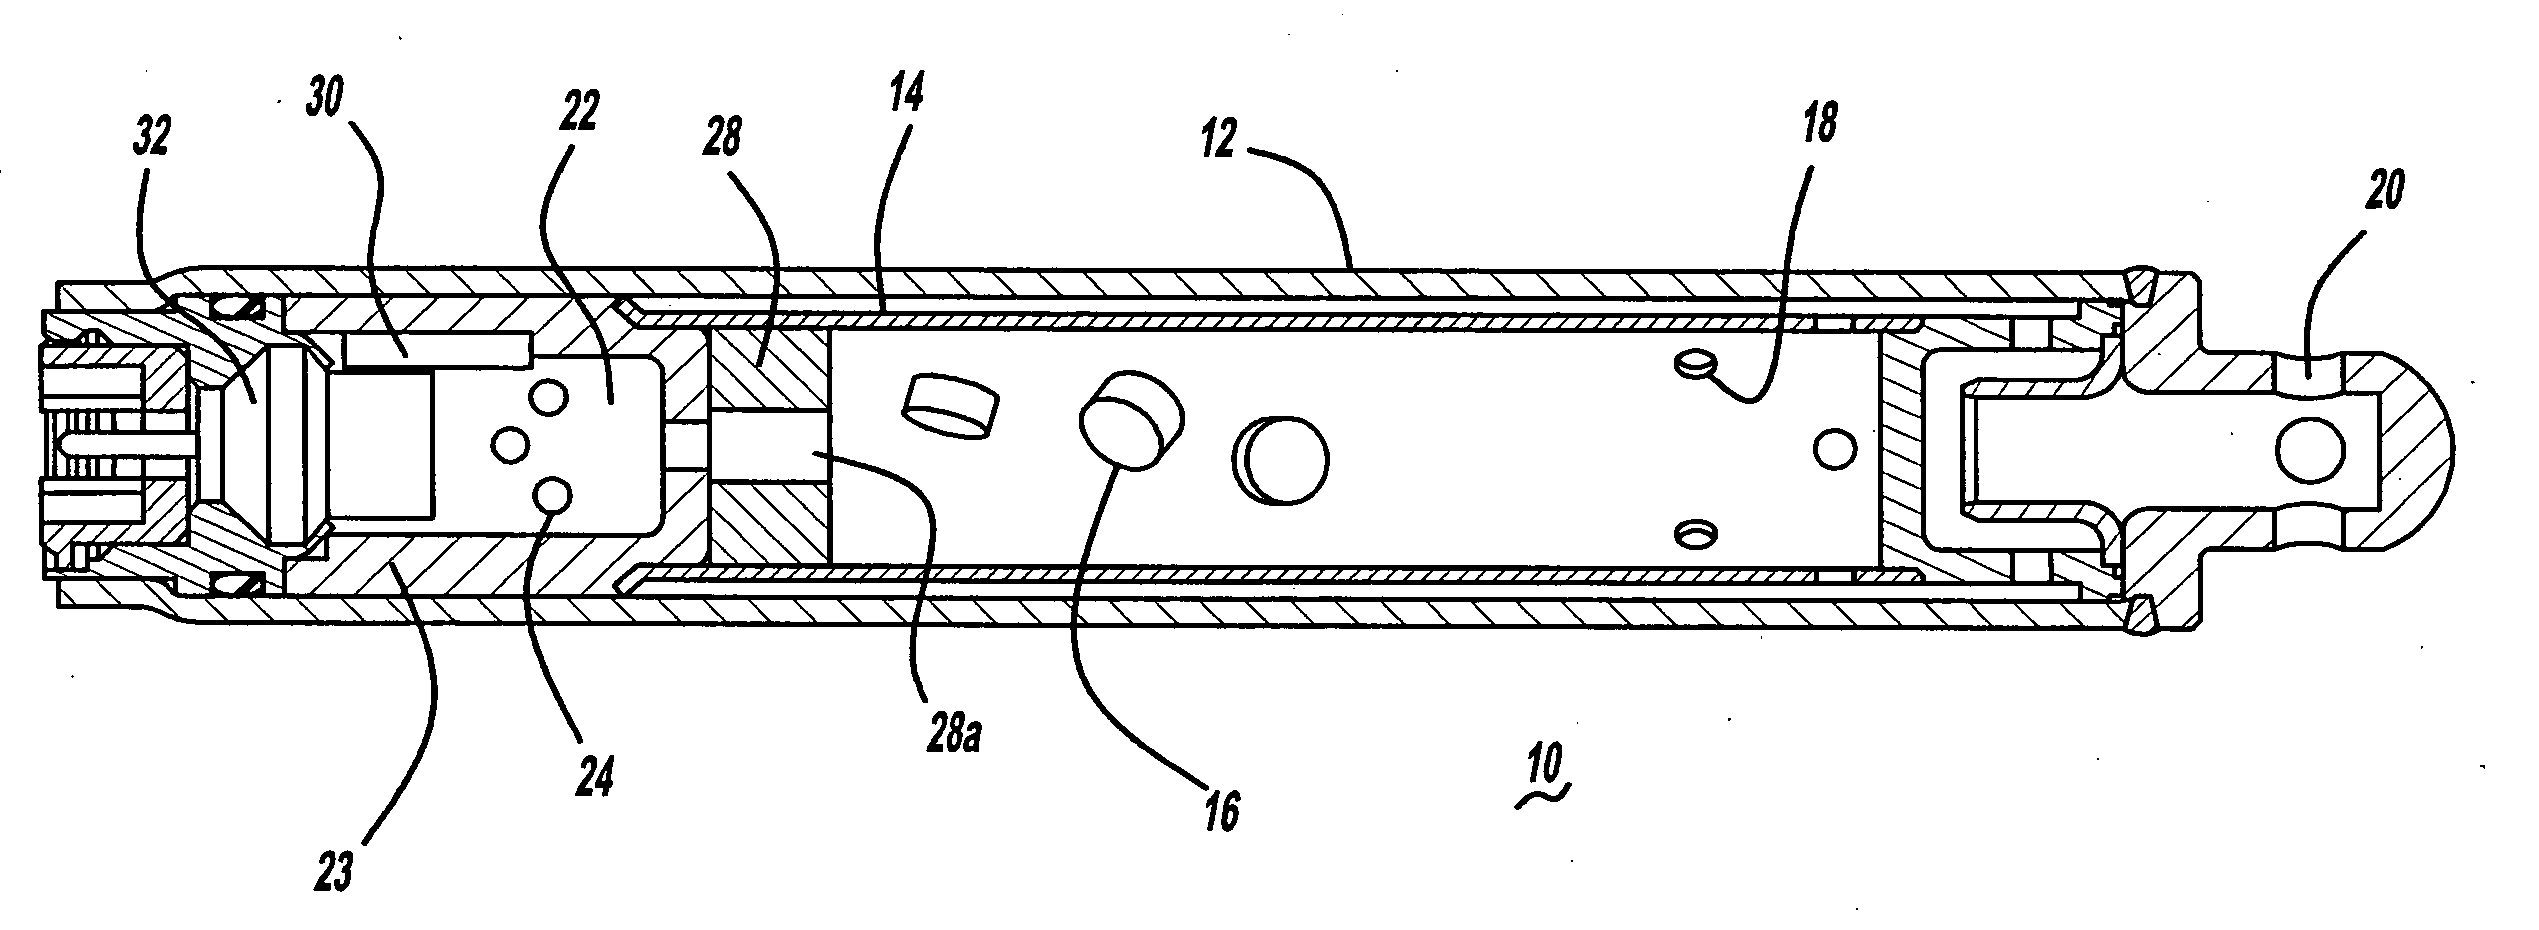 Gas generating system and composition